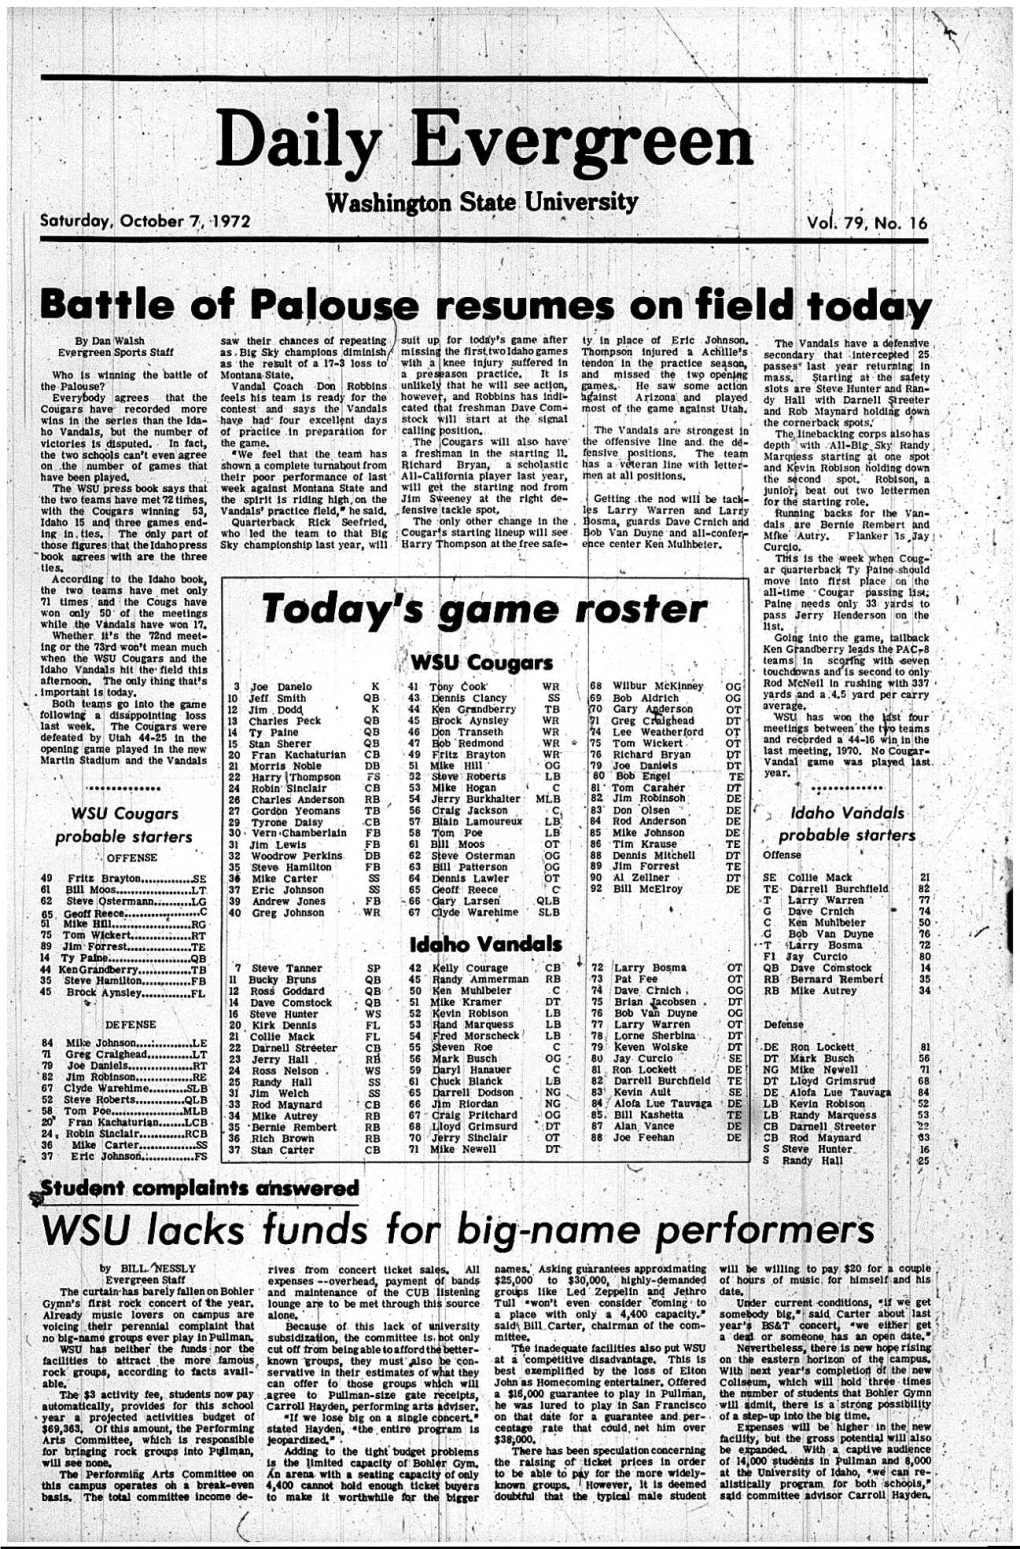 Battle of Palouso Resumes on Field Today Today's Game Roster WSU